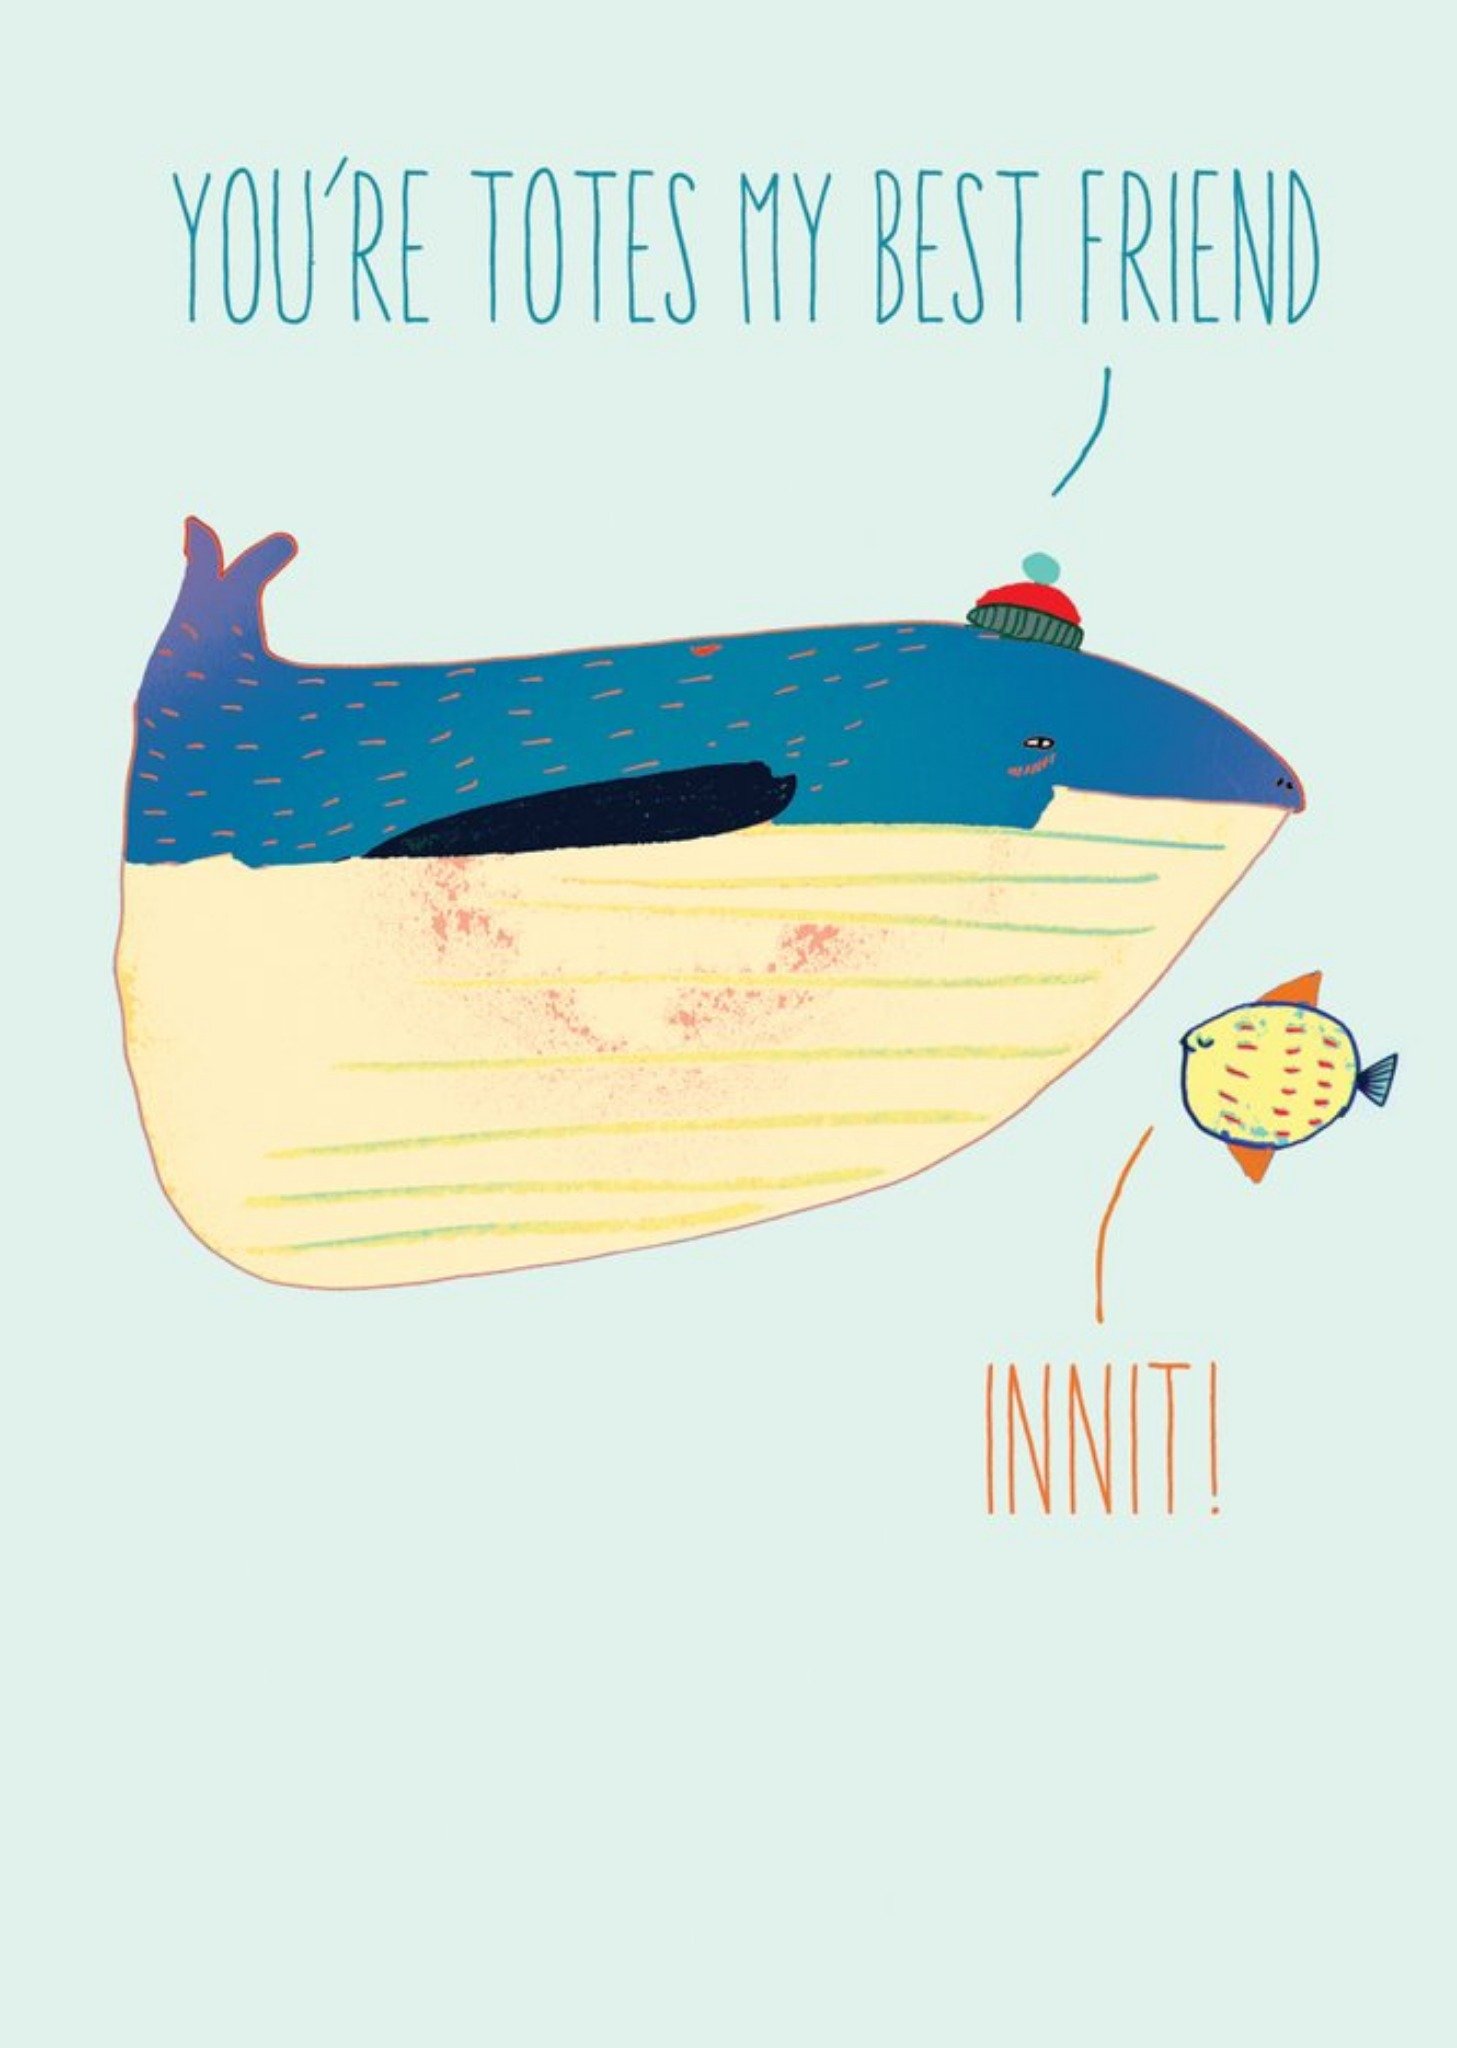 Brainbox Candy Whale And Fish You Are Totes My Best Friend Innit Card Ecard